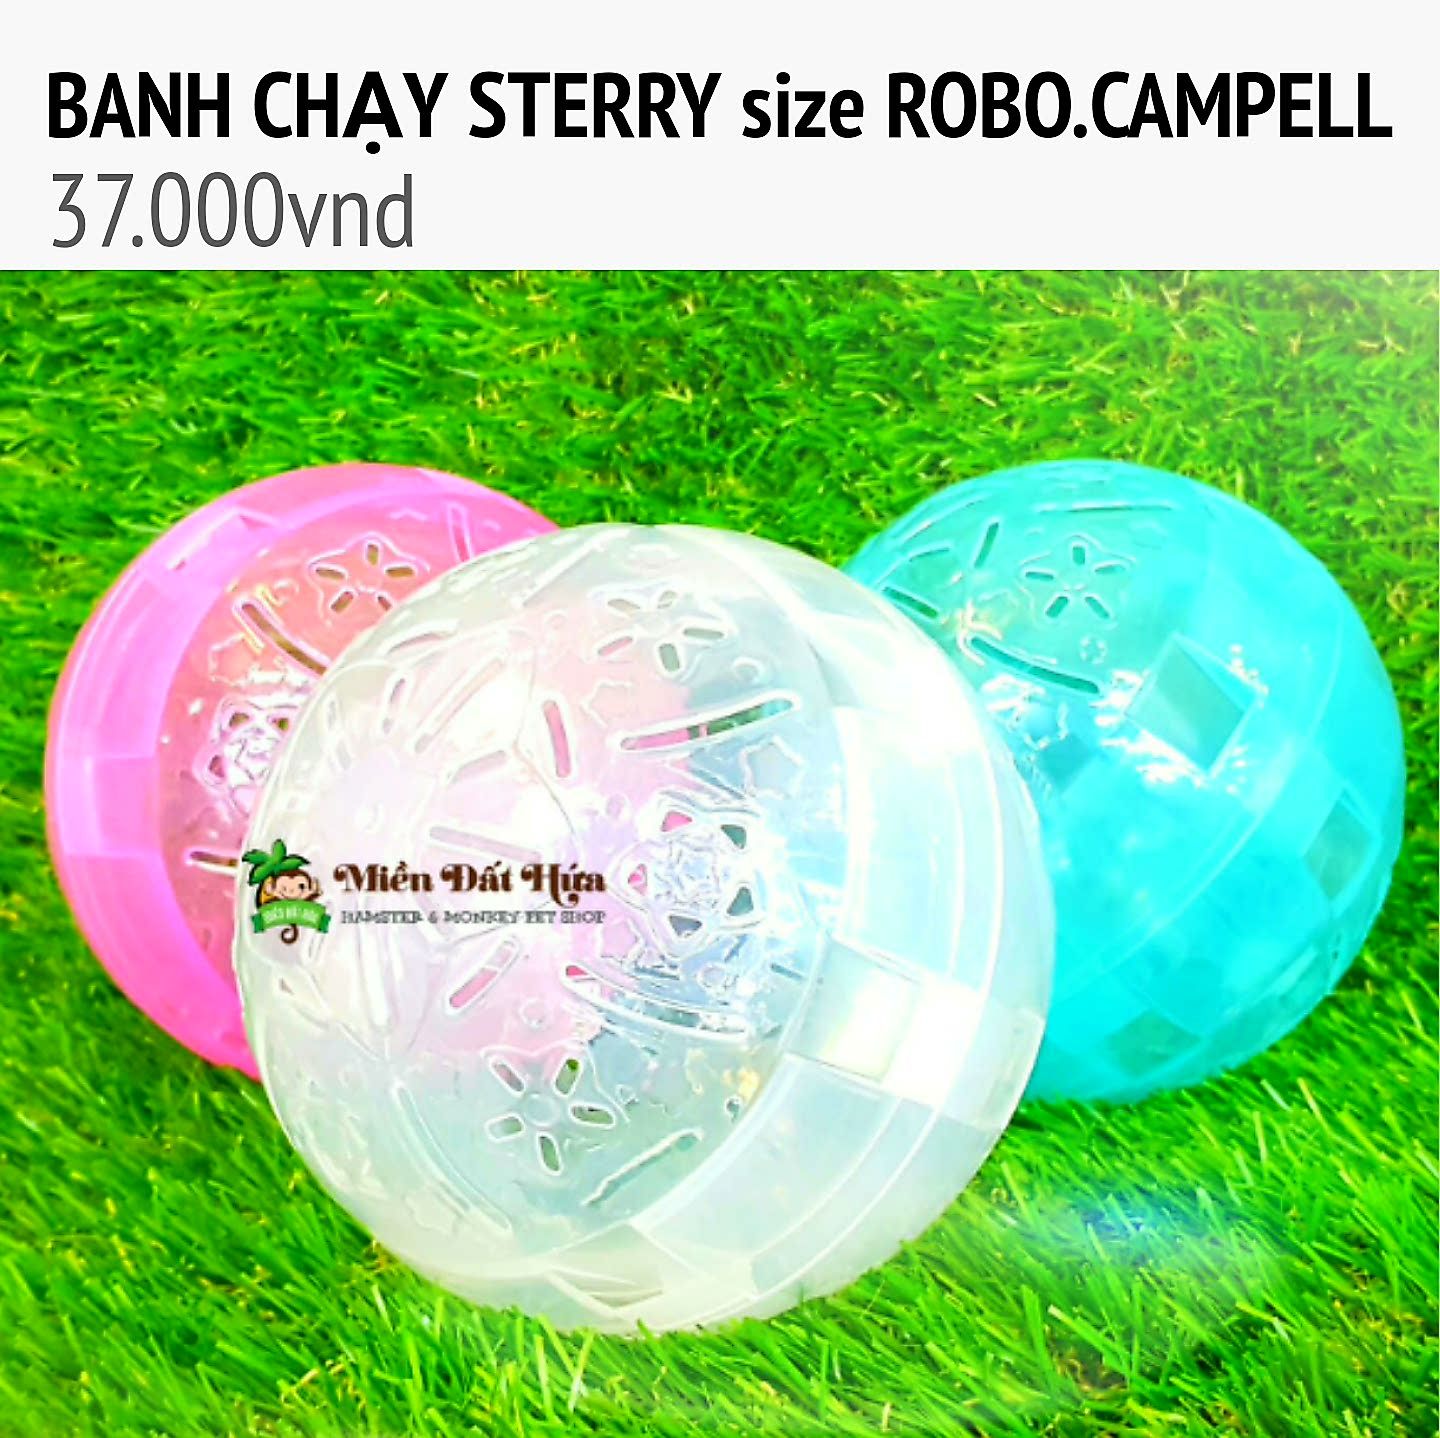 banh chạy steery size robo campell